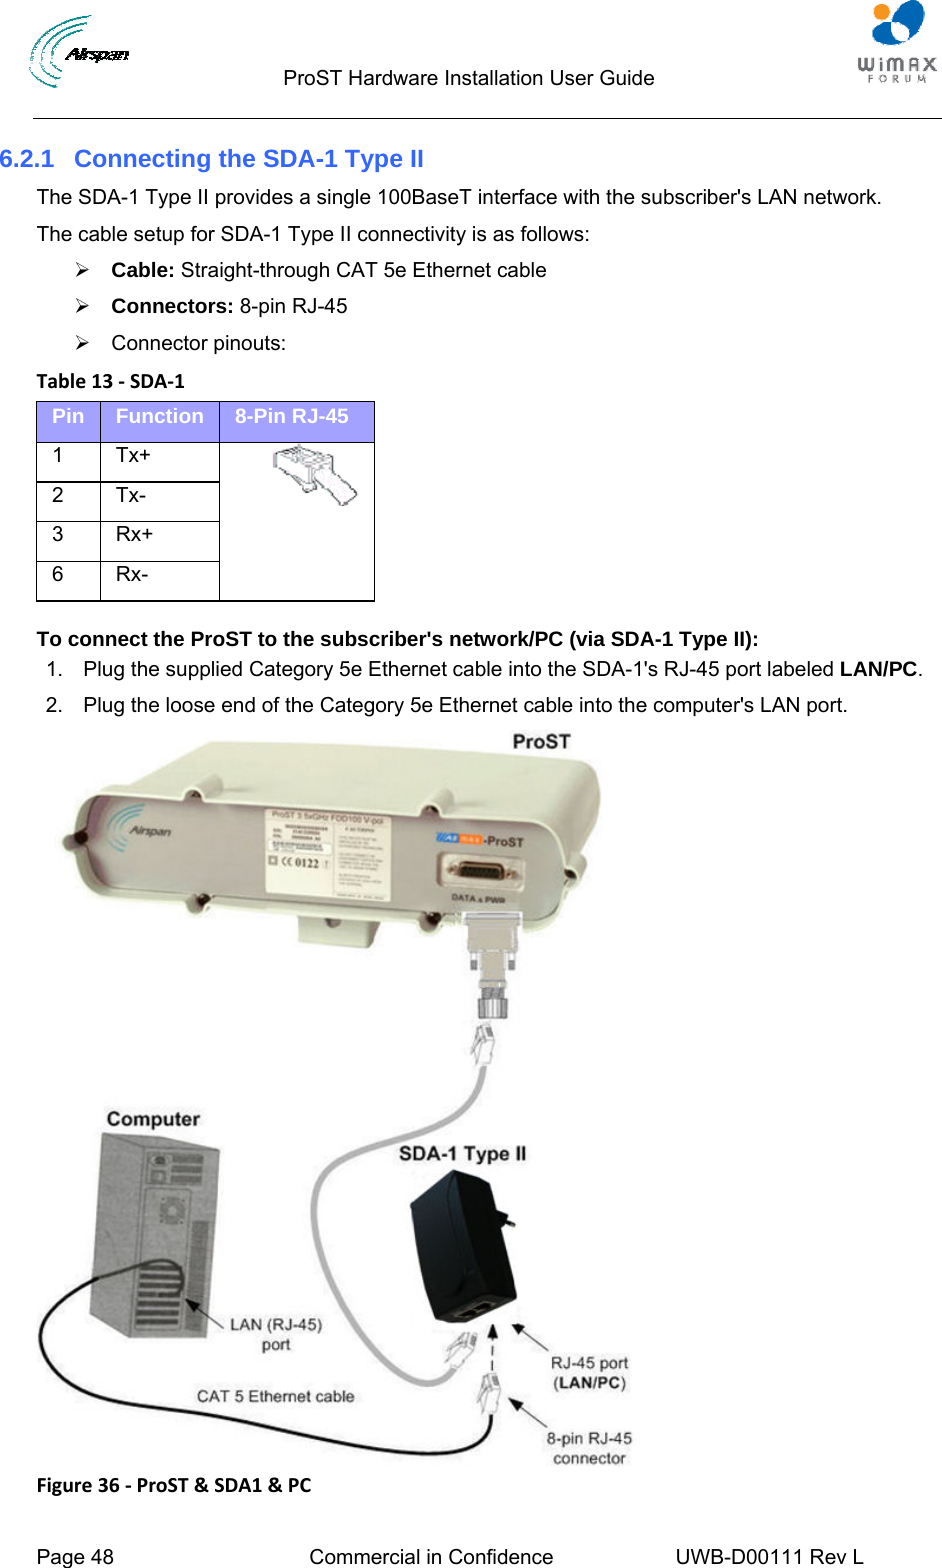                                  ProST Hardware Installation User Guide  Page 48  Commercial in Confidence  UWB-D00111 Rev L   6.2.1  Connecting the SDA-1 Type II The SDA-1 Type II provides a single 100BaseT interface with the subscriber&apos;s LAN network. The cable setup for SDA-1 Type II connectivity is as follows: ¾ Cable: Straight-through CAT 5e Ethernet cable ¾ Connectors: 8-pin RJ-45 ¾ Connector pinouts: Table13‐SDA‐1Pin  Function  8-Pin RJ-45 1 Tx+  2 Tx- 3 Rx+ 6 Rx-   To connect the ProST to the subscriber&apos;s network/PC (via SDA-1 Type II): 1.  Plug the supplied Category 5e Ethernet cable into the SDA-1&apos;s RJ-45 port labeled LAN/PC. 2.  Plug the loose end of the Category 5e Ethernet cable into the computer&apos;s LAN port.  Figure36‐ProST&amp;SDA1&amp;PC